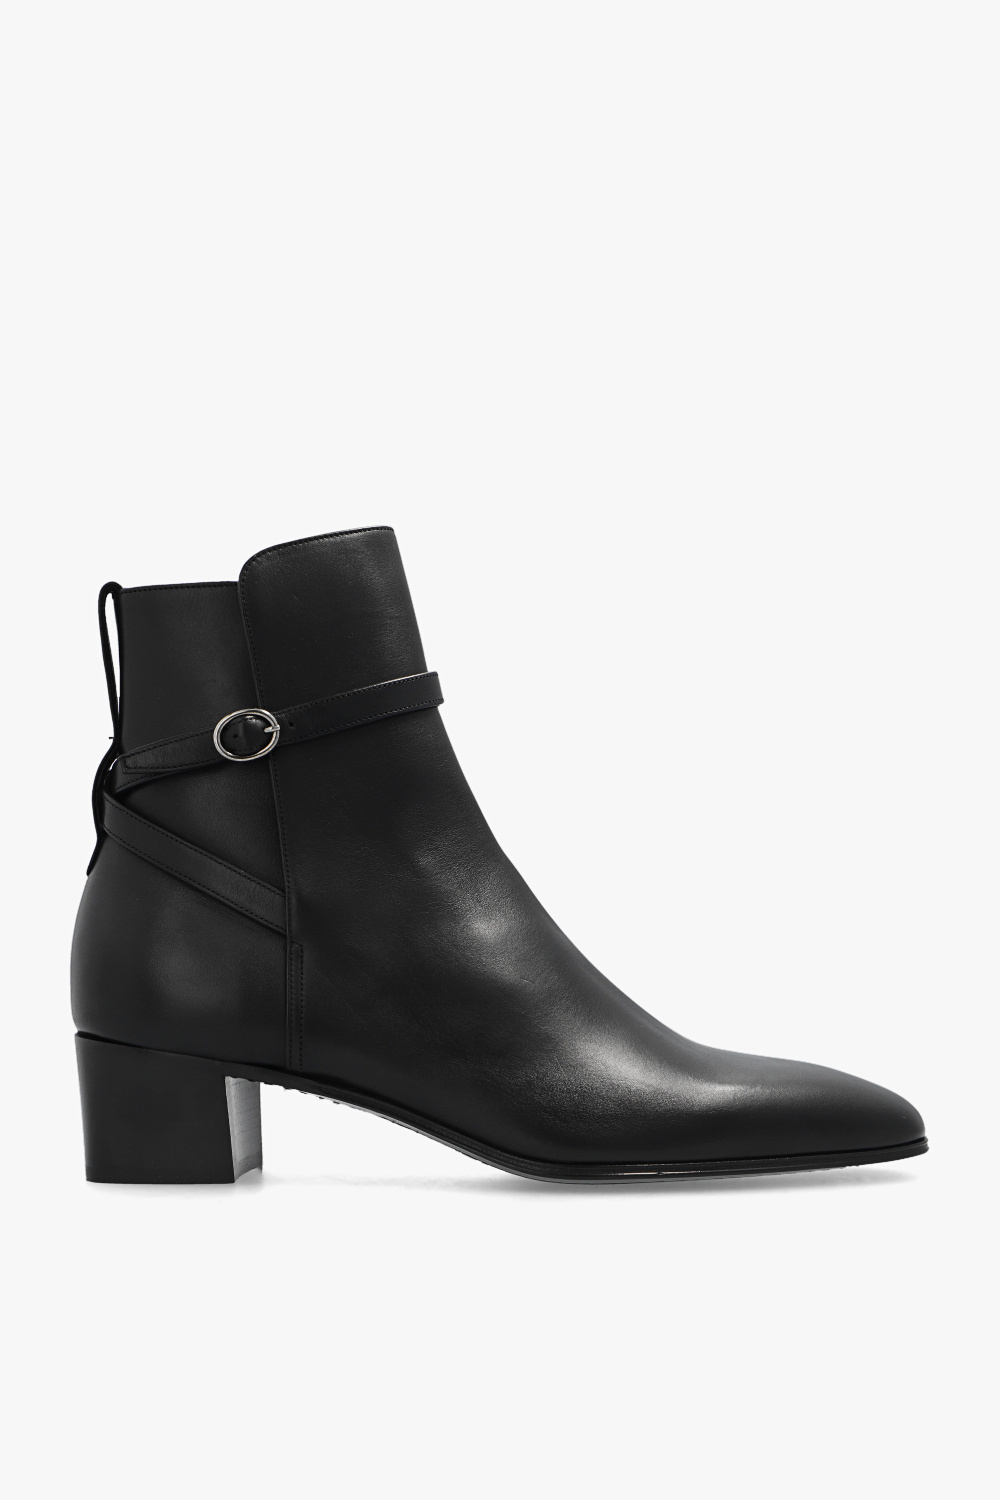 Saint Laurent ‘Terry’ leather ankle boots